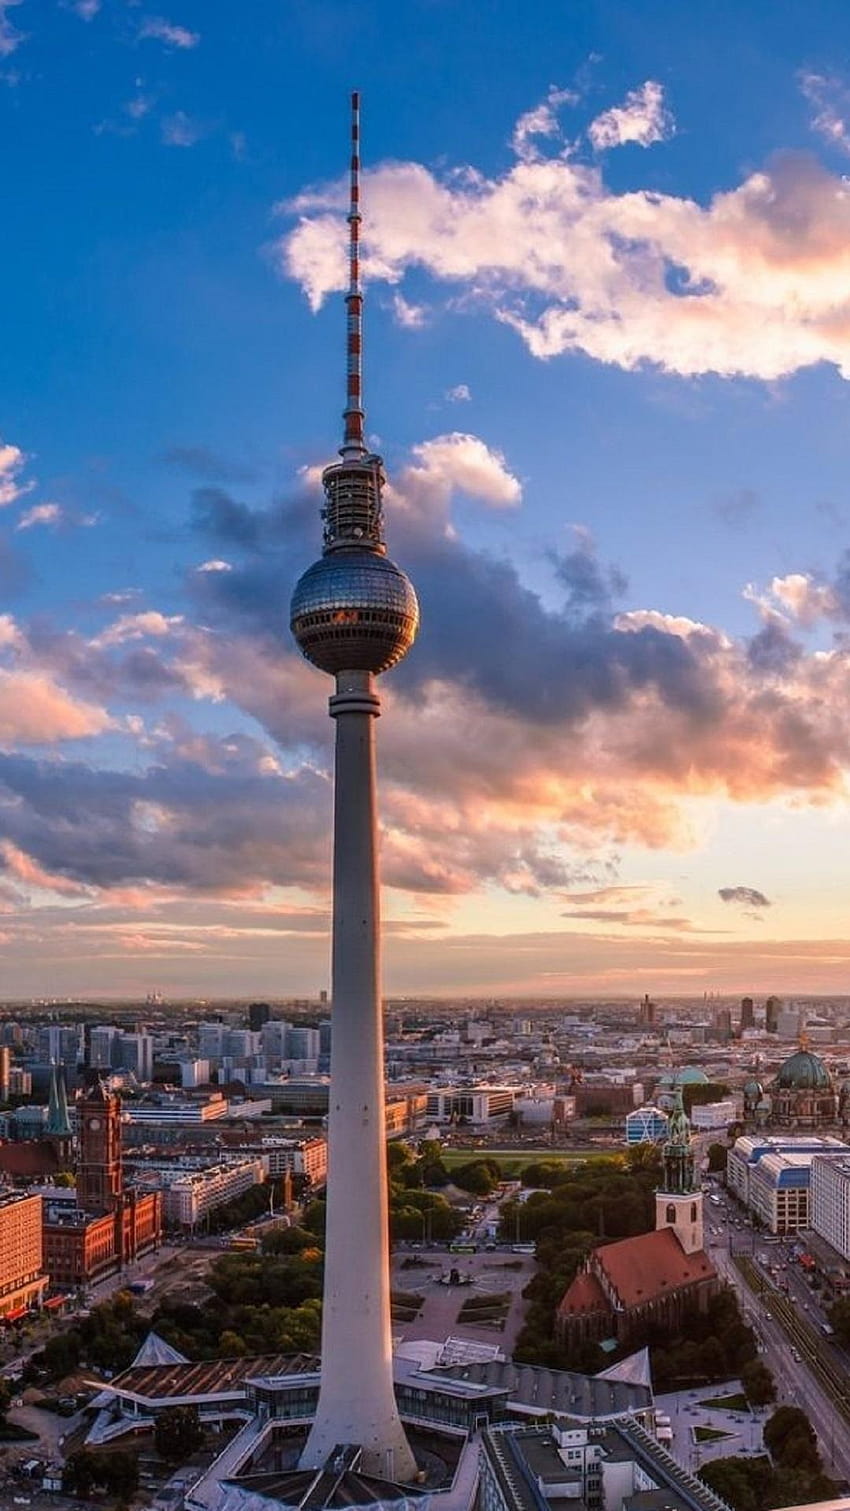 Berlin for Android, berlin city HD phone wallpaper